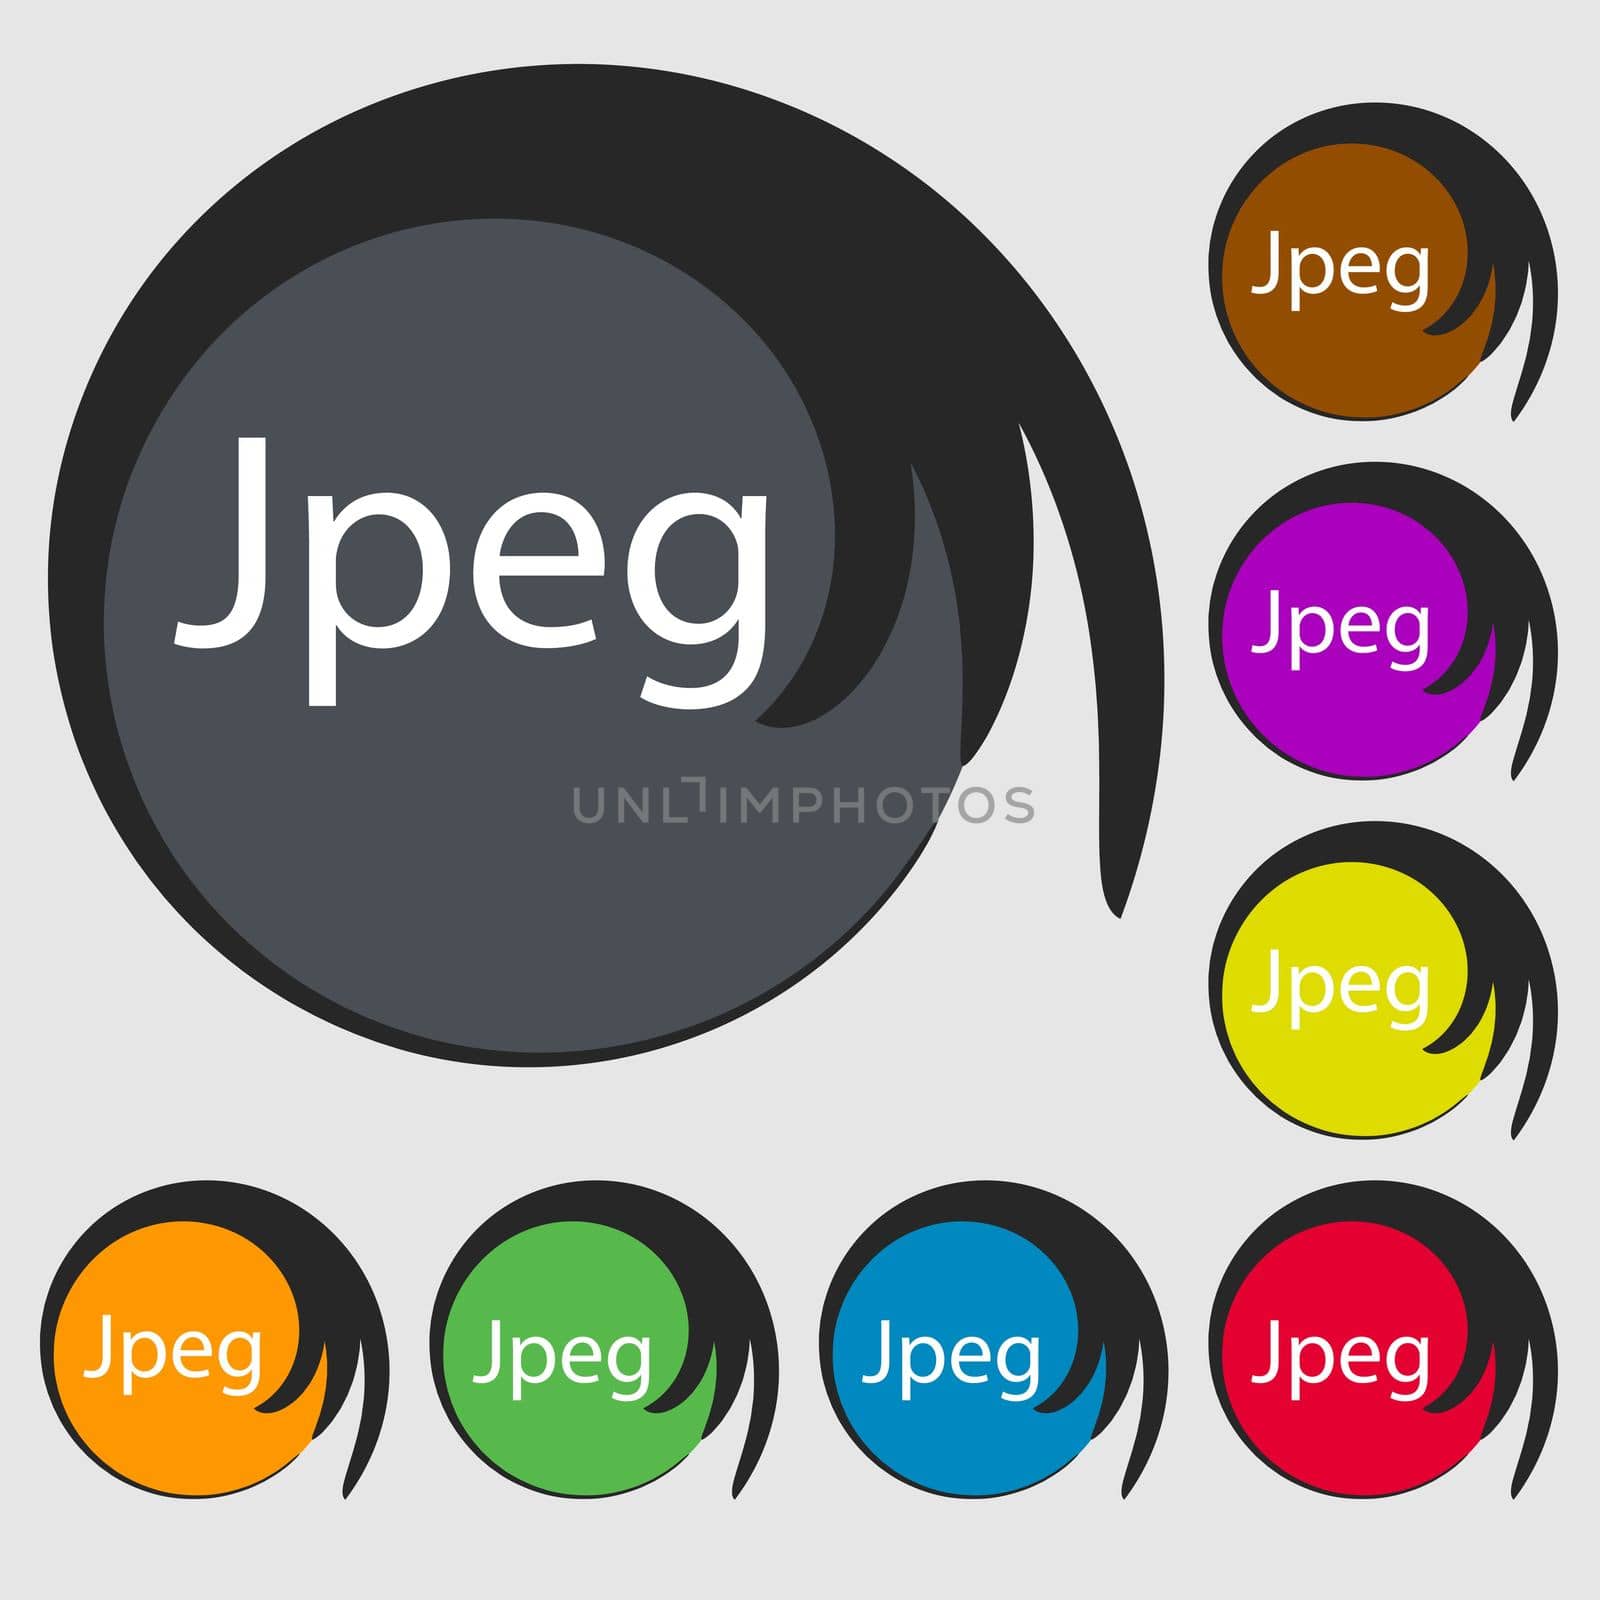 File JPG sign icon. Download image file symbol. Symbols on eight colored buttons. illustration